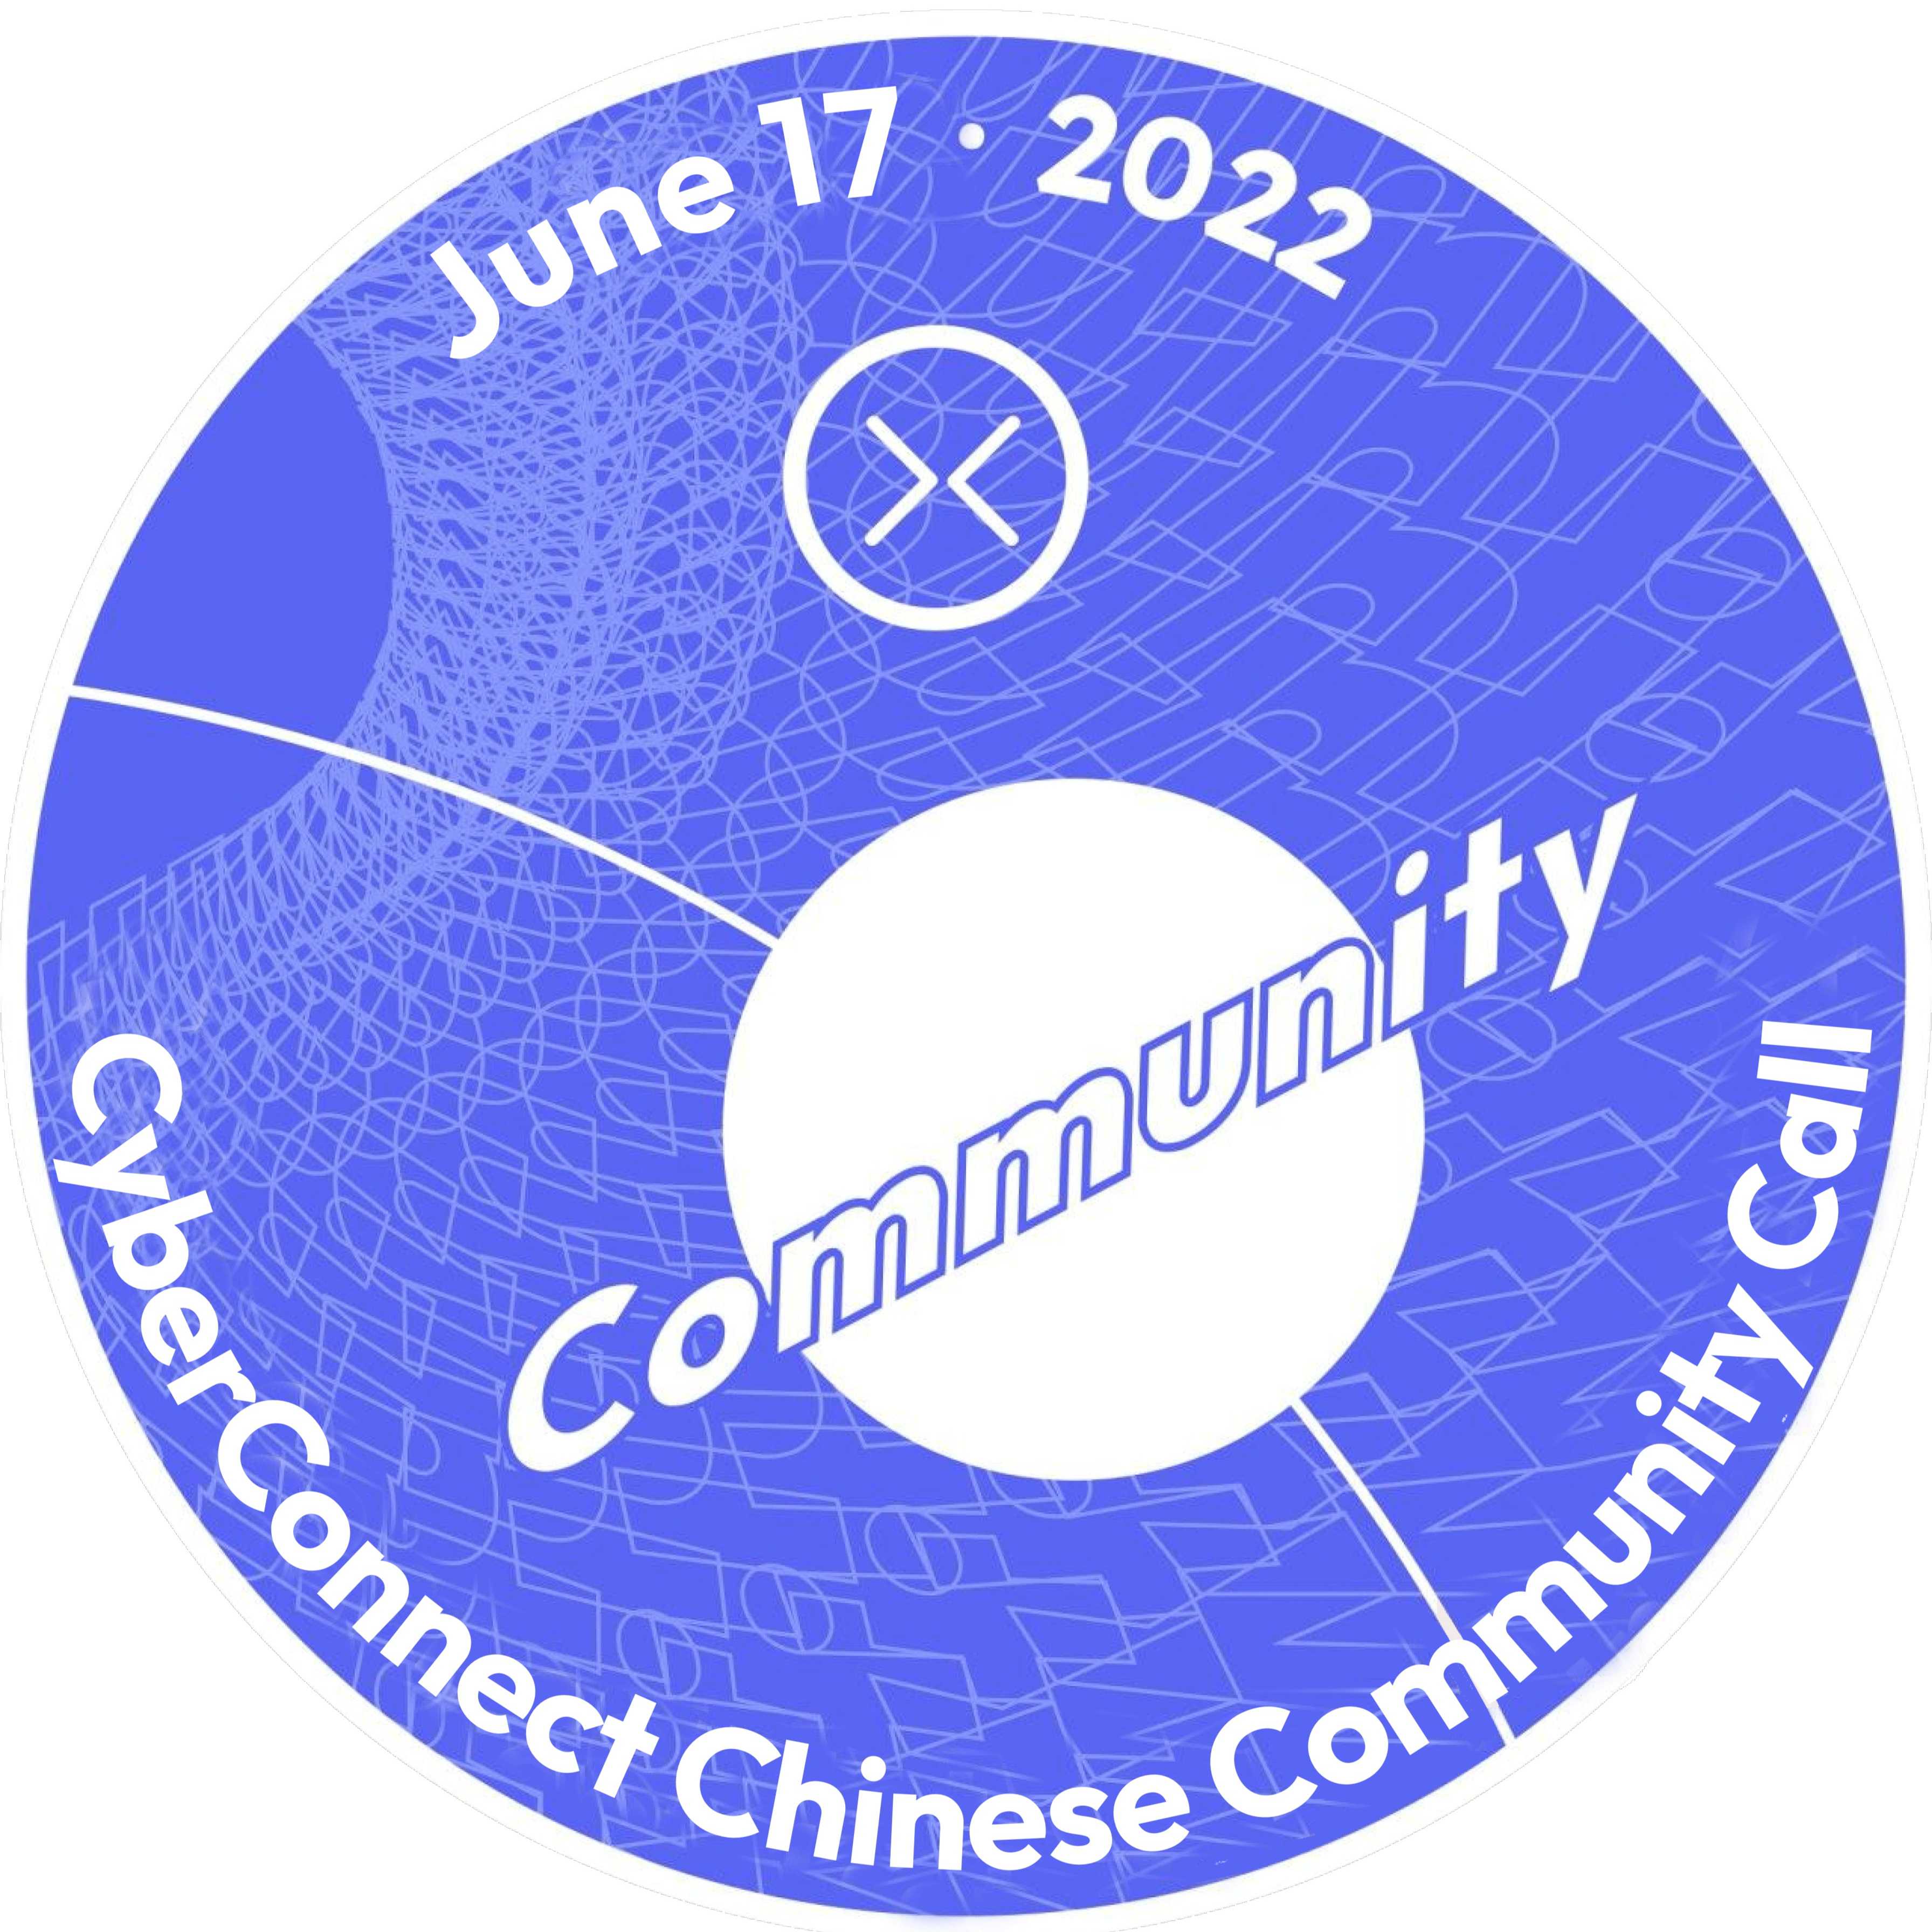 CyberConnect Chinese Community Call - June 17